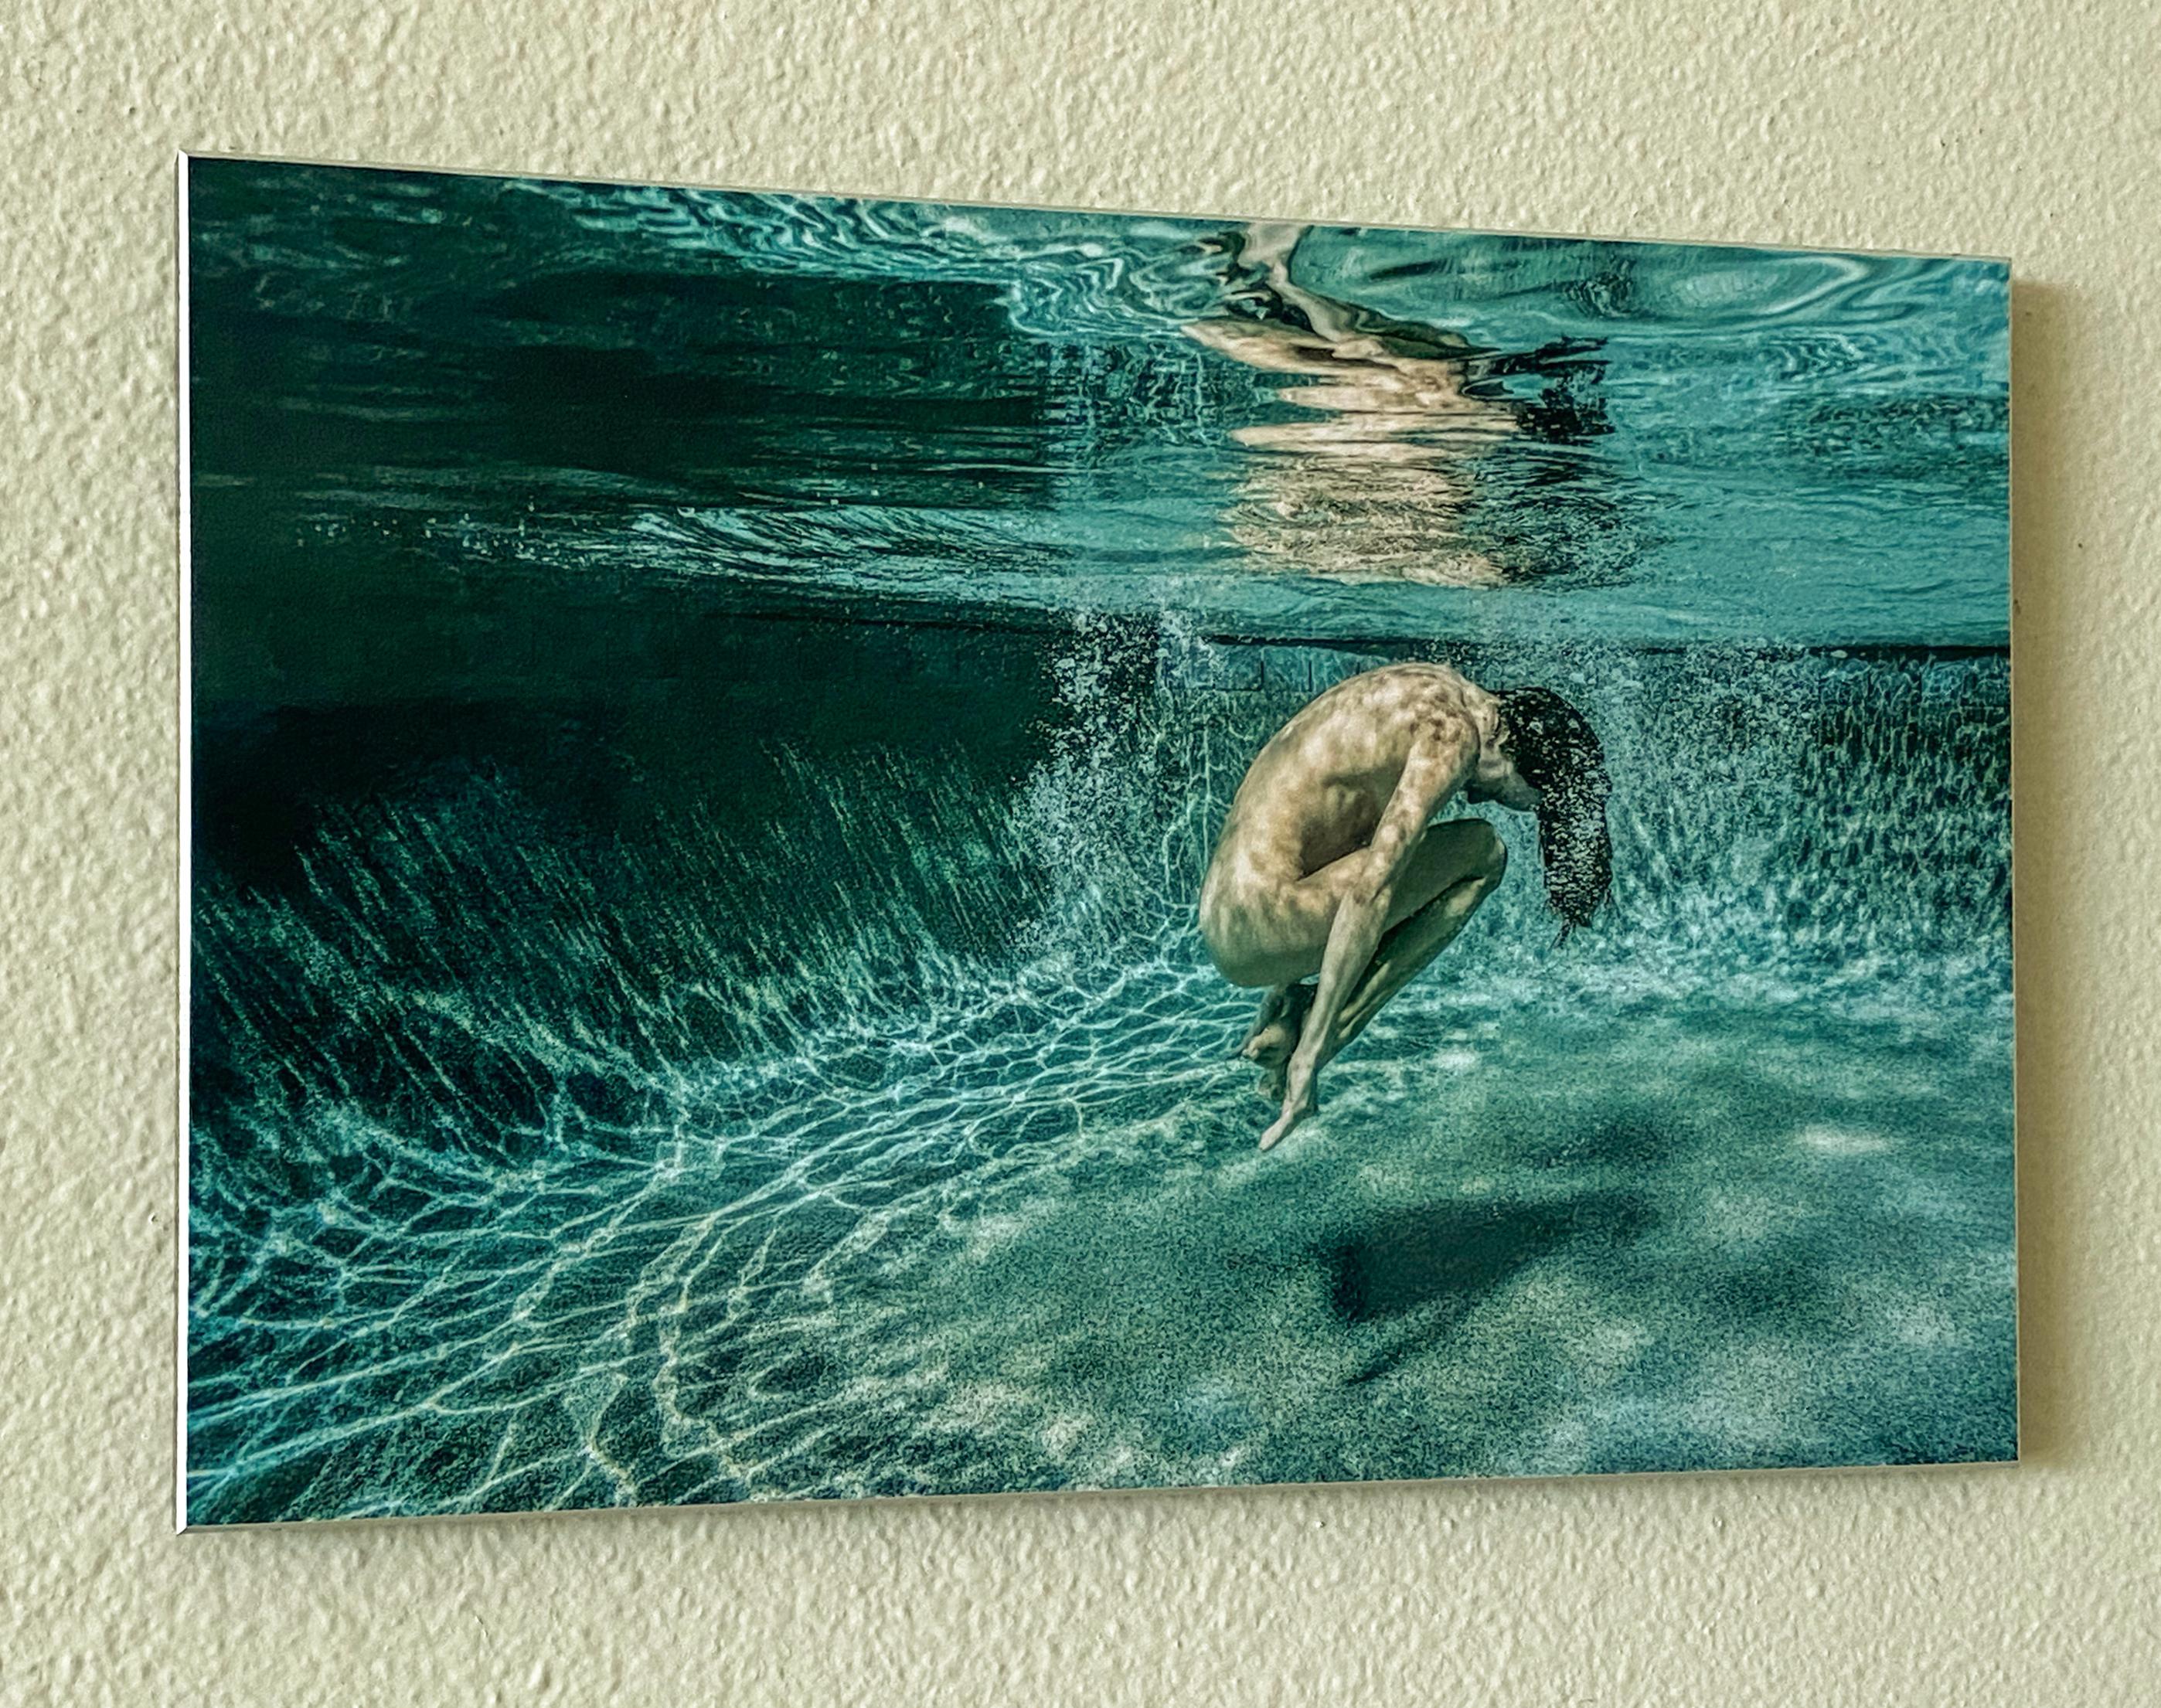 Green Roll (triptych)  - underwater nude photograph - print on aluminum - Gray Nude Photograph by Alex Sher